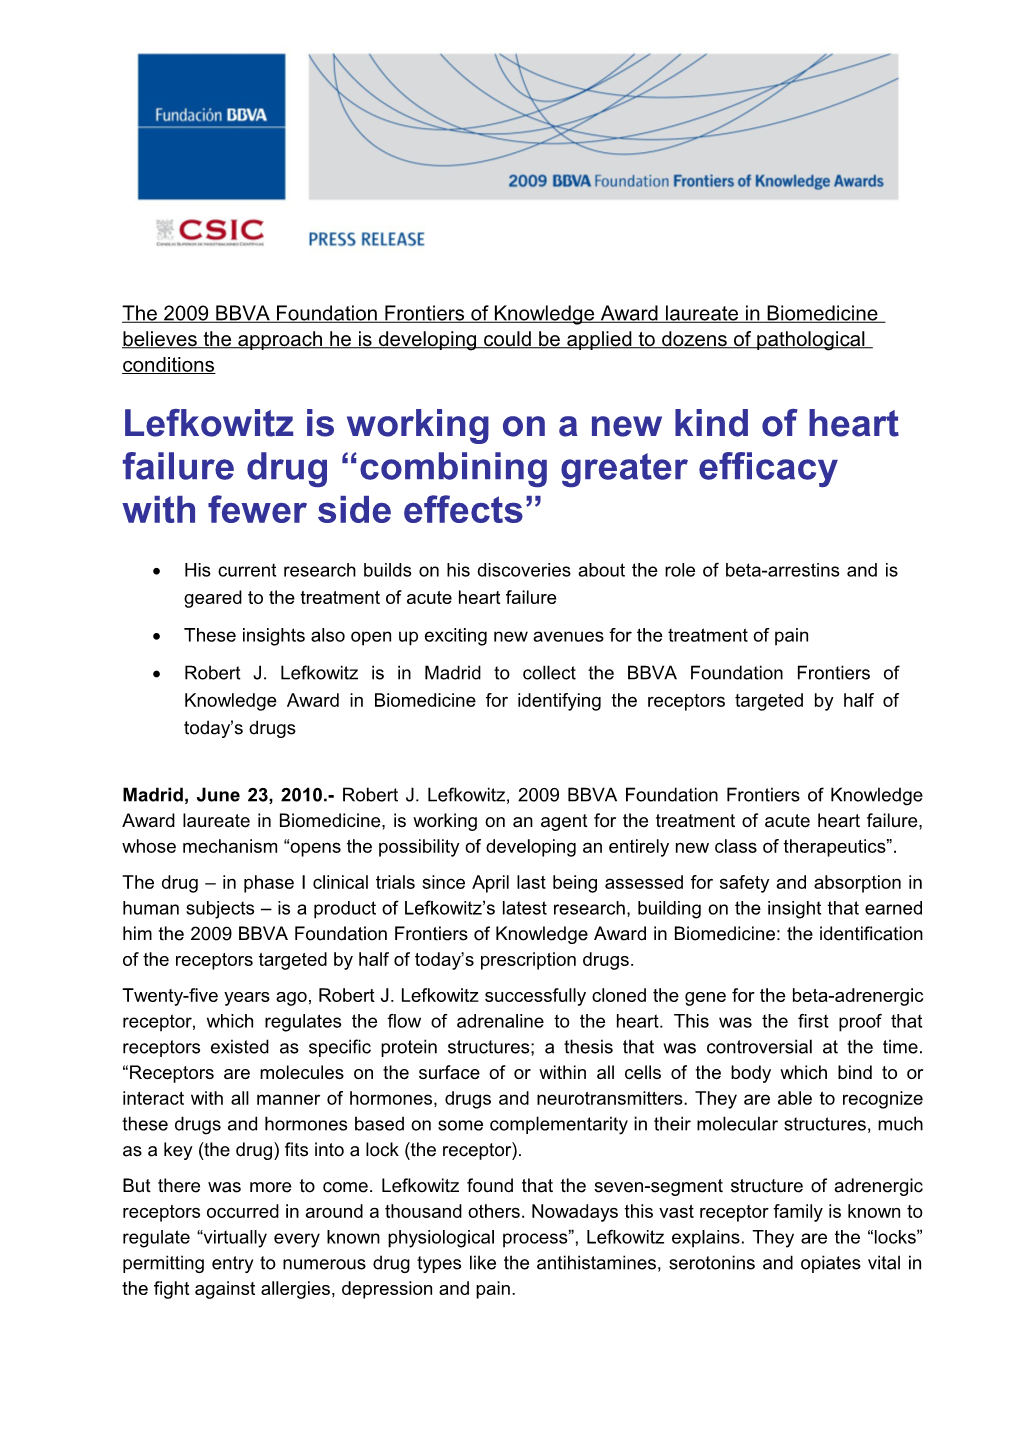 Lefkowitz Is Working on a New Kind of Heart Failure Drug Combining Greater Efficacy With